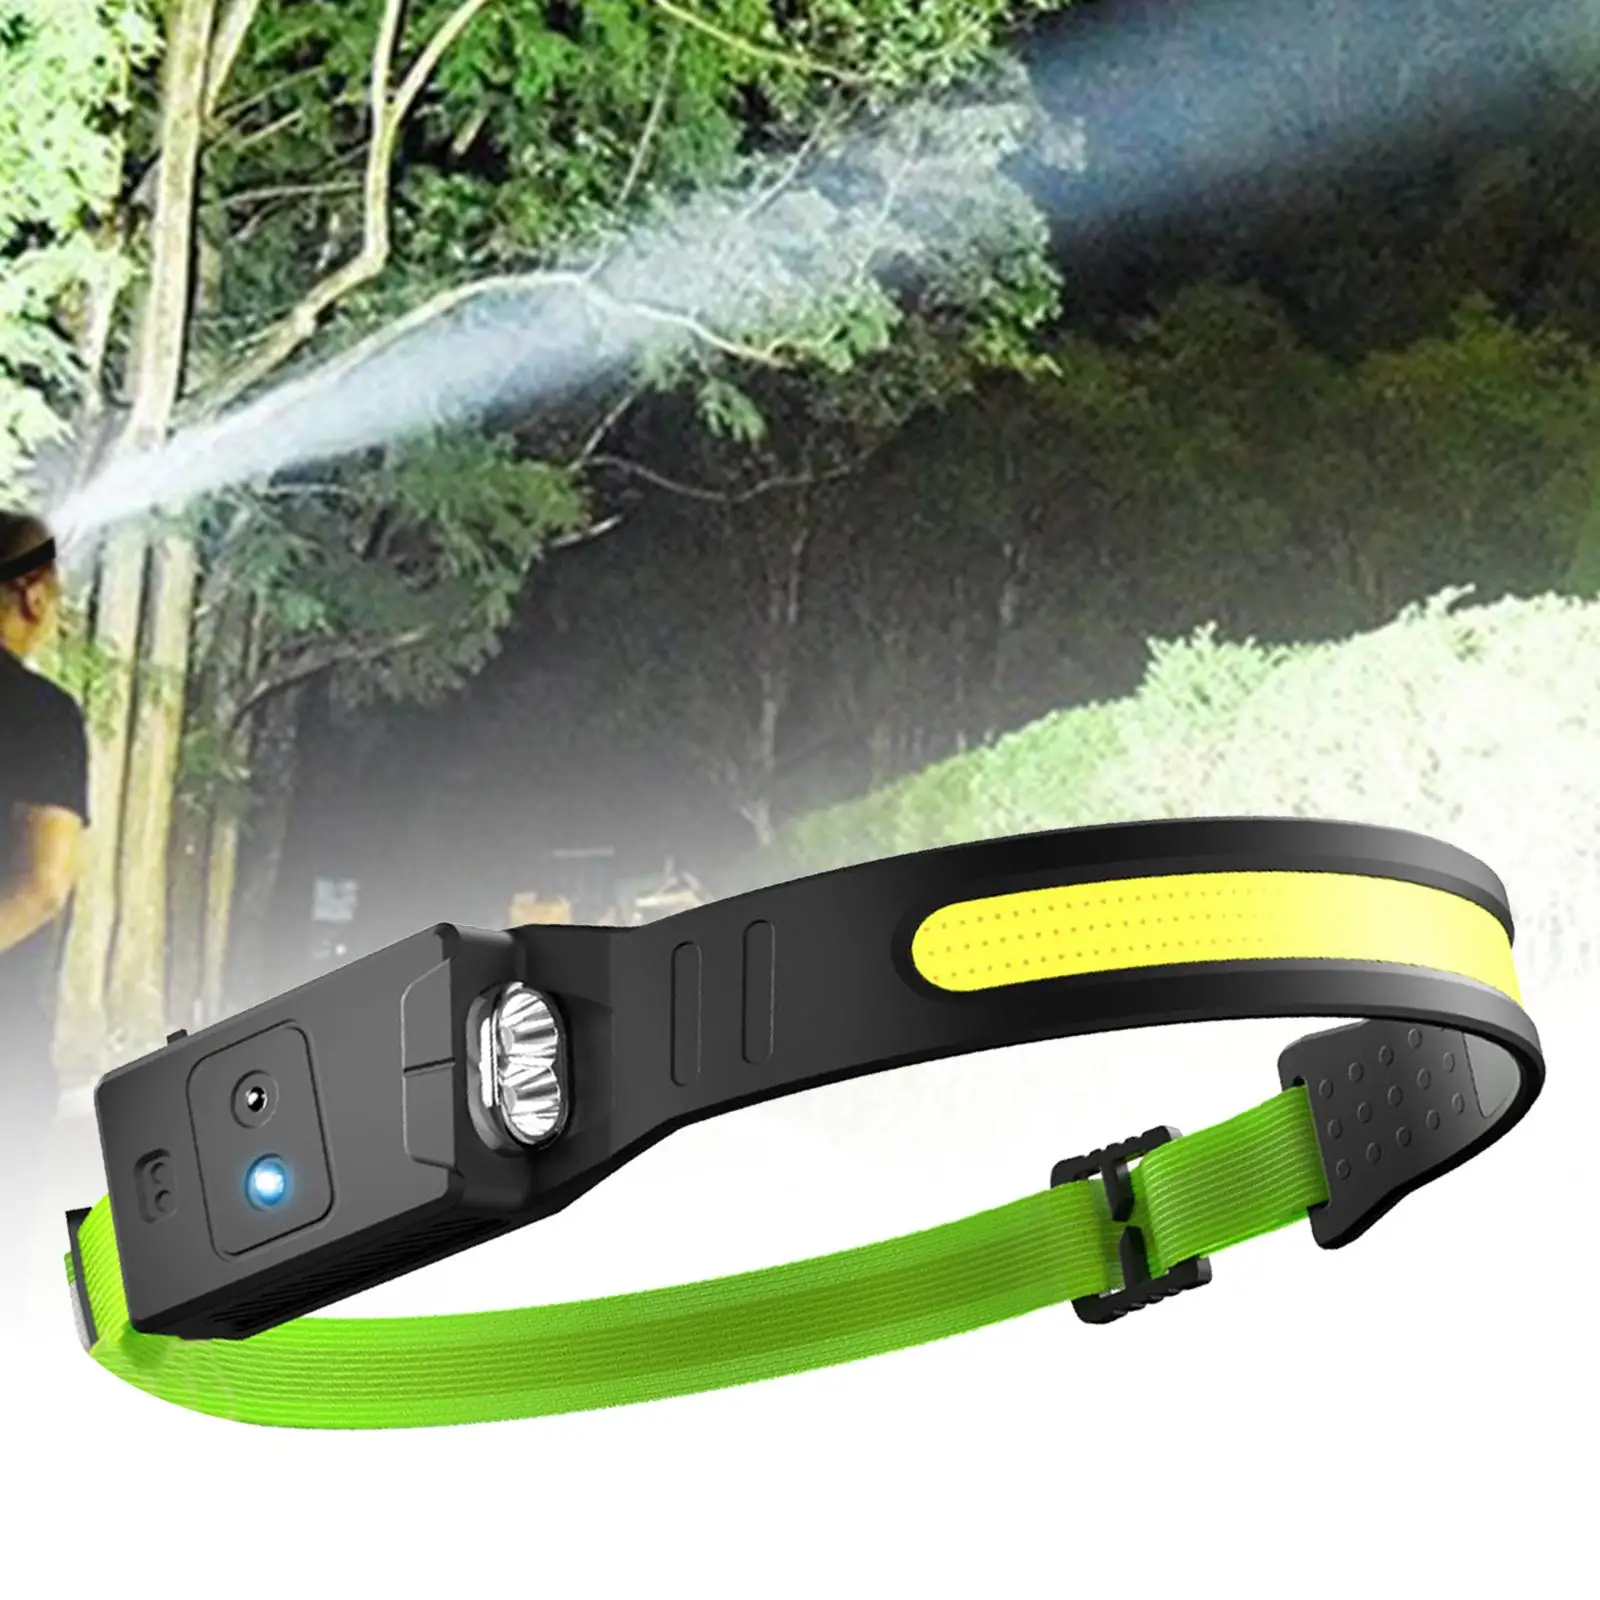 LED Headlamp Hand Sensor IPX4 Waterproof 3 Modes Lightweight Super Bright flashlights for Jogging Cycling Fishing Camping Adults